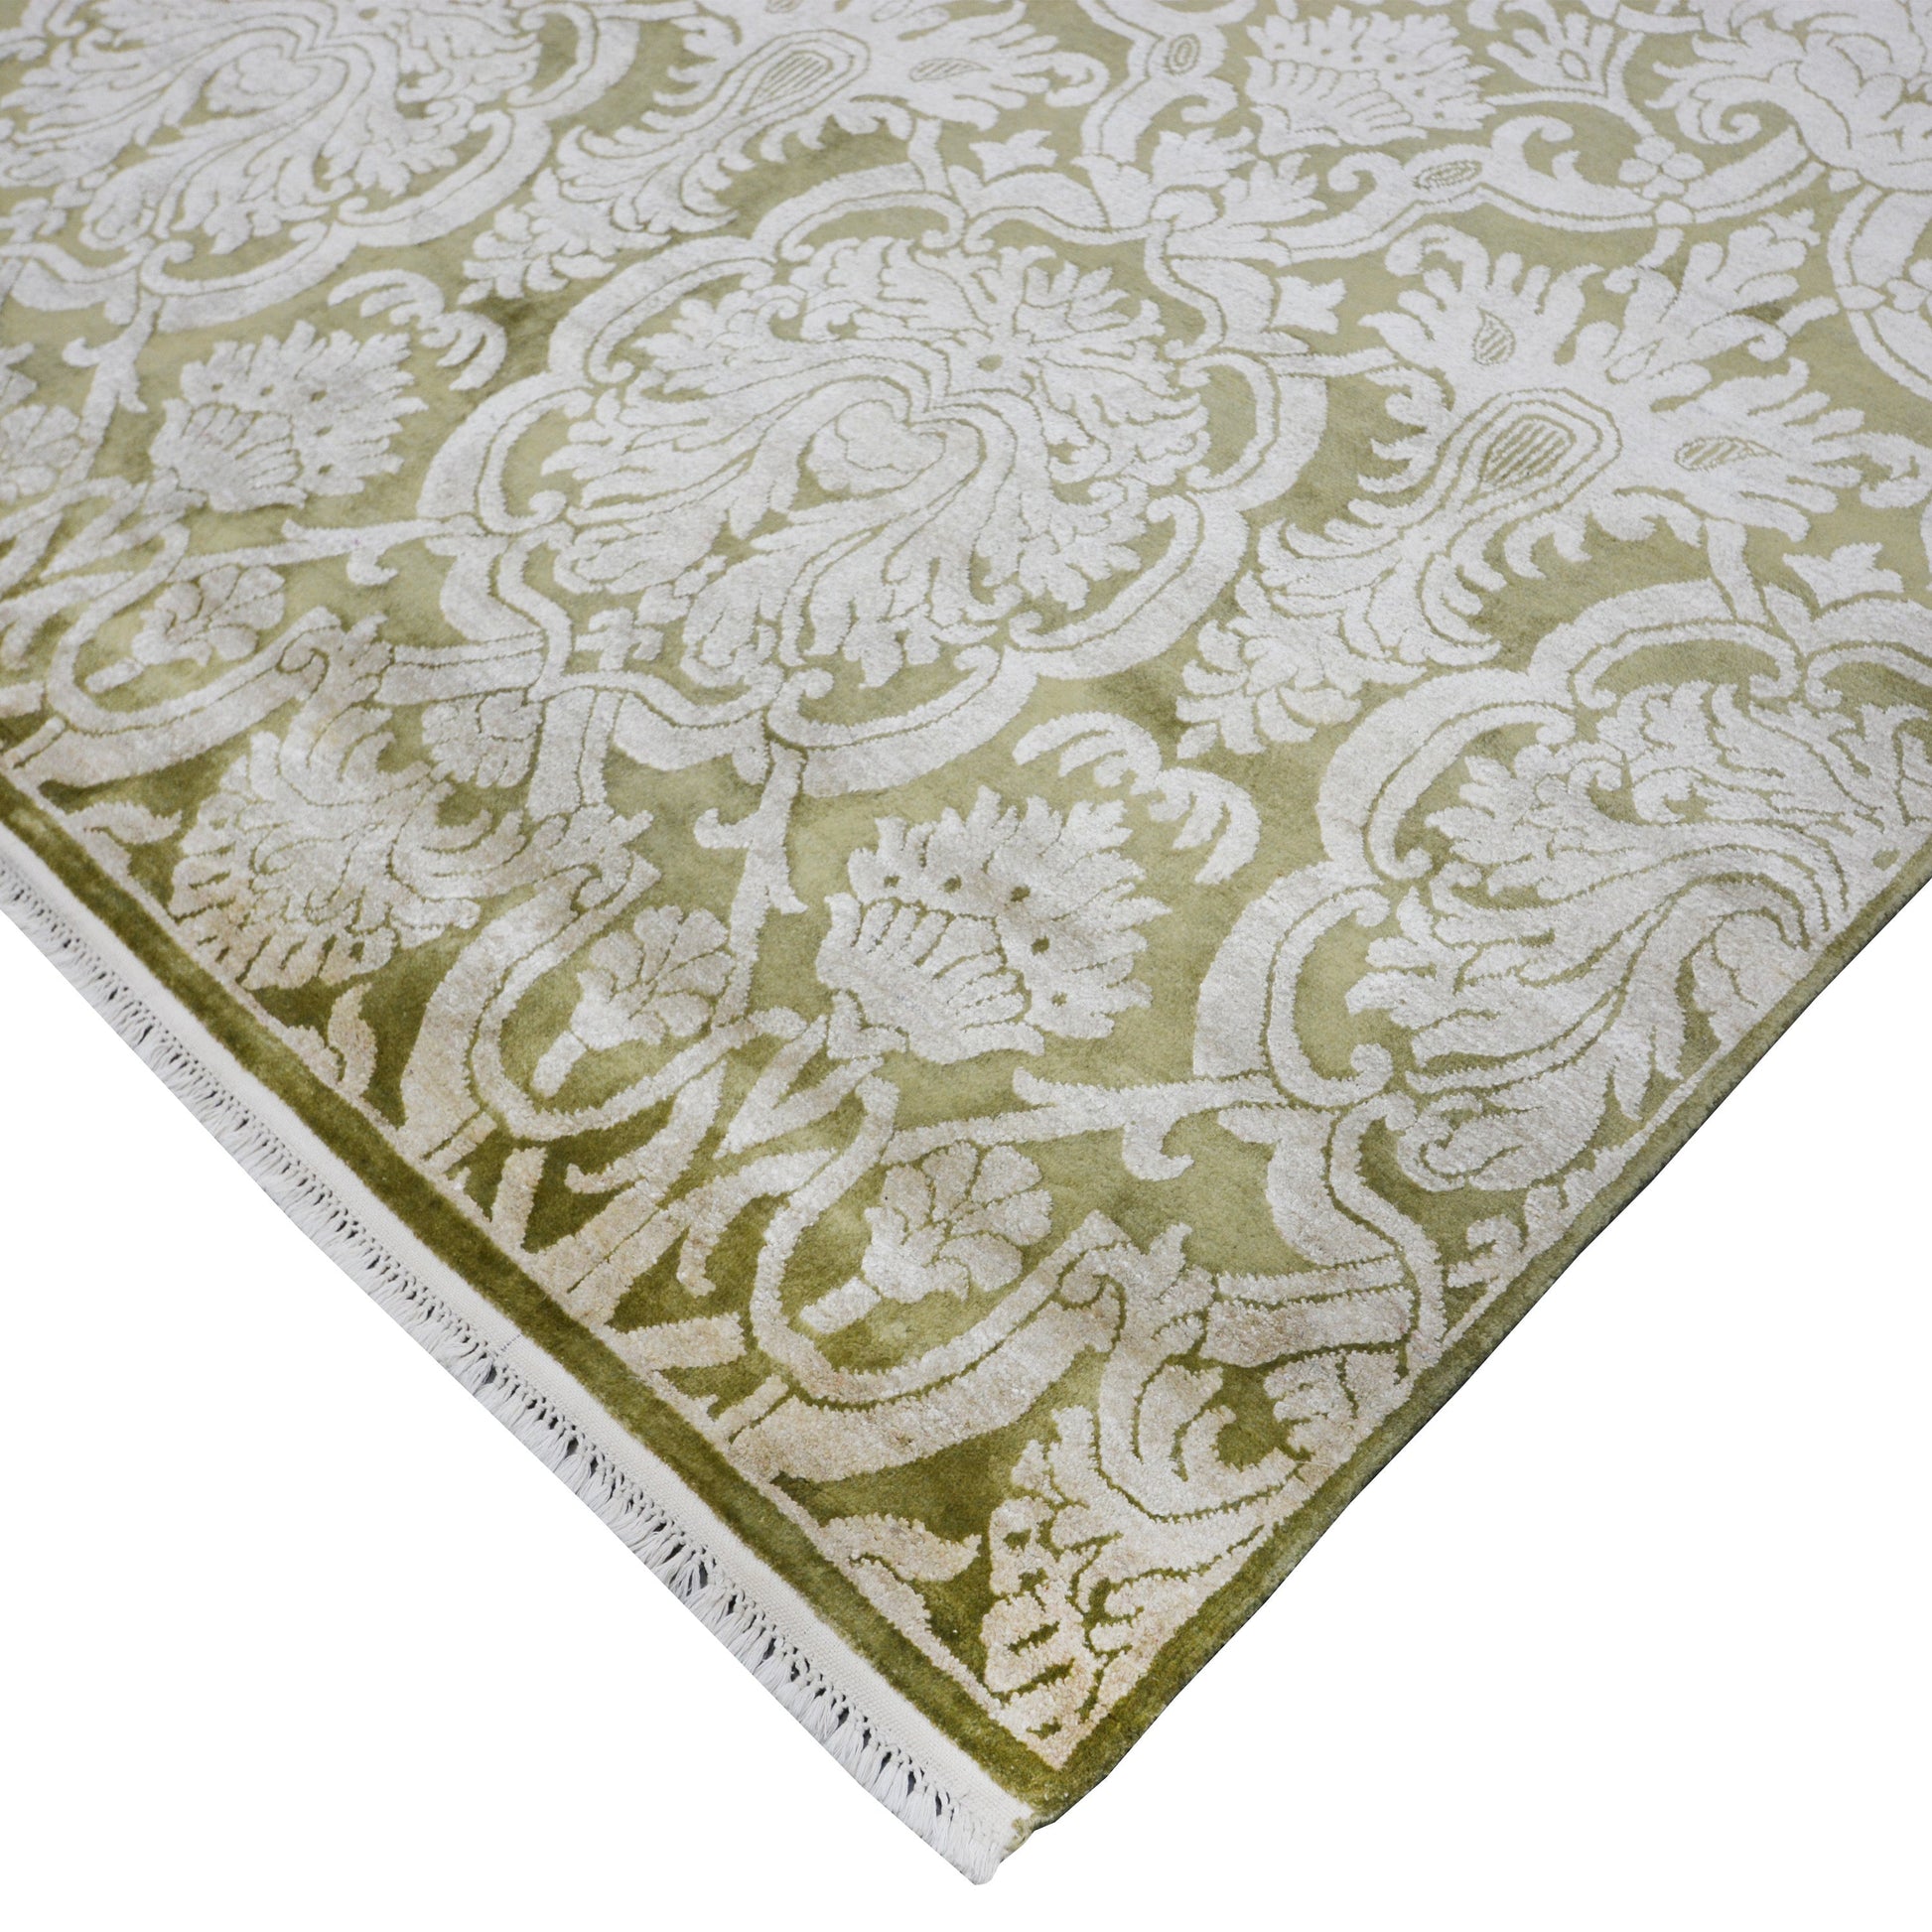 Get trendy with Elegacy Olive Green and Ivory Transitional Damask Handknotted Area Rug - Contemporary Rugs available at Jaipur Oriental Rugs. Grab yours for $5795.00 today!